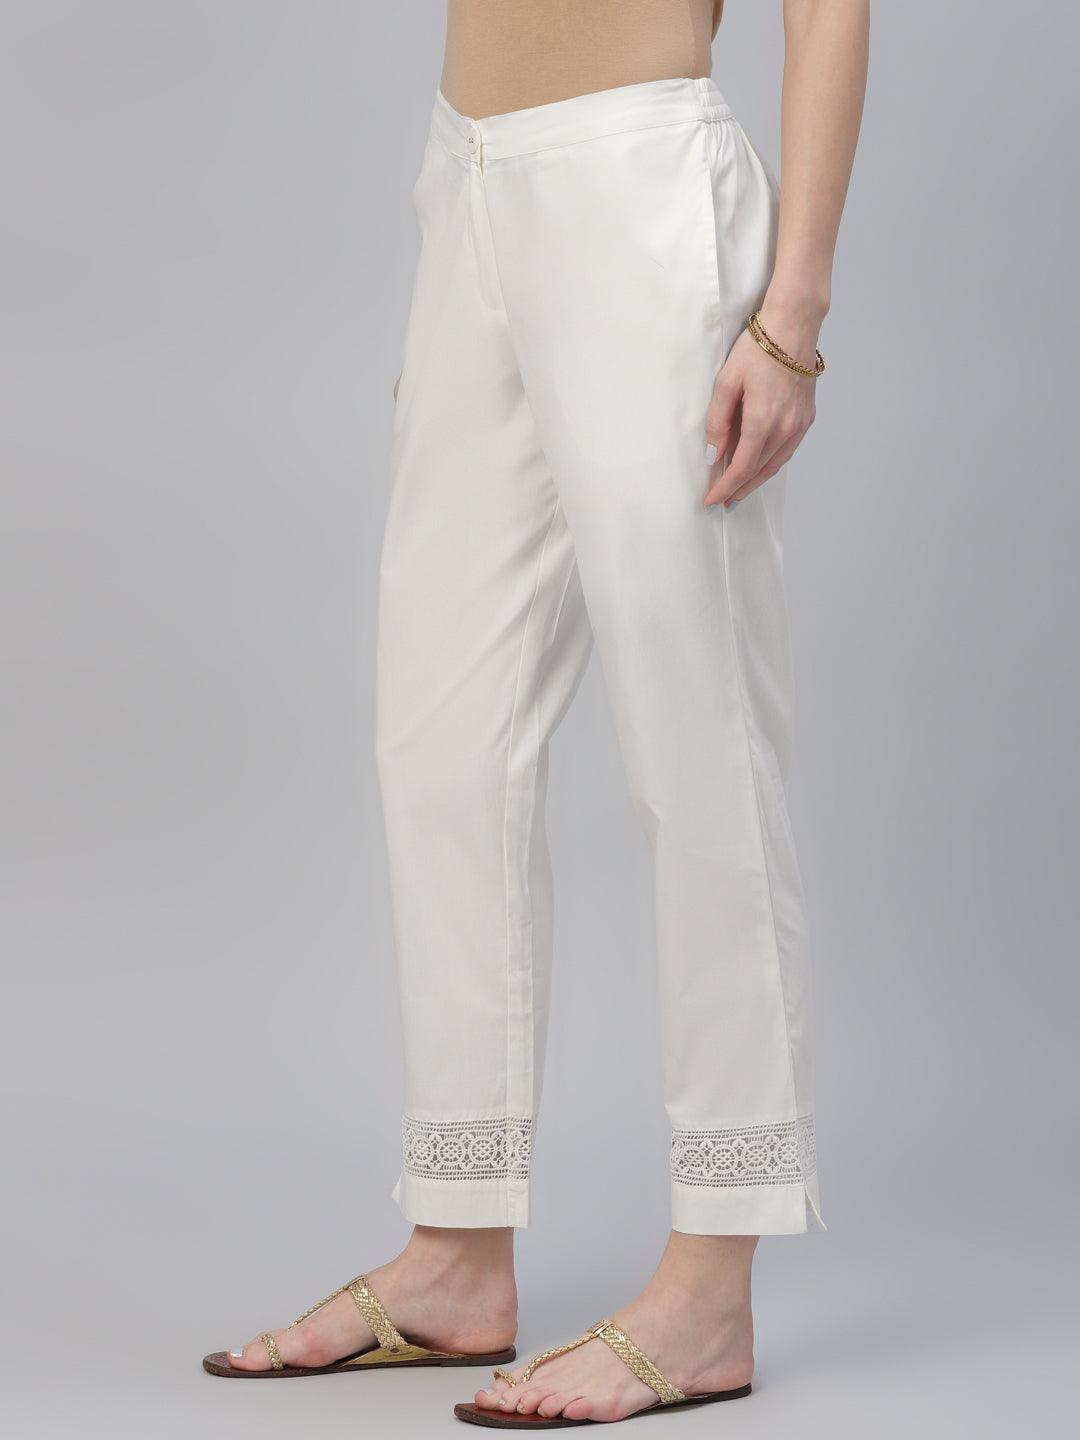 Buy Ruby Wine Gap Twill Cotton Cargo Pants Online At Best Prices | Tistabene